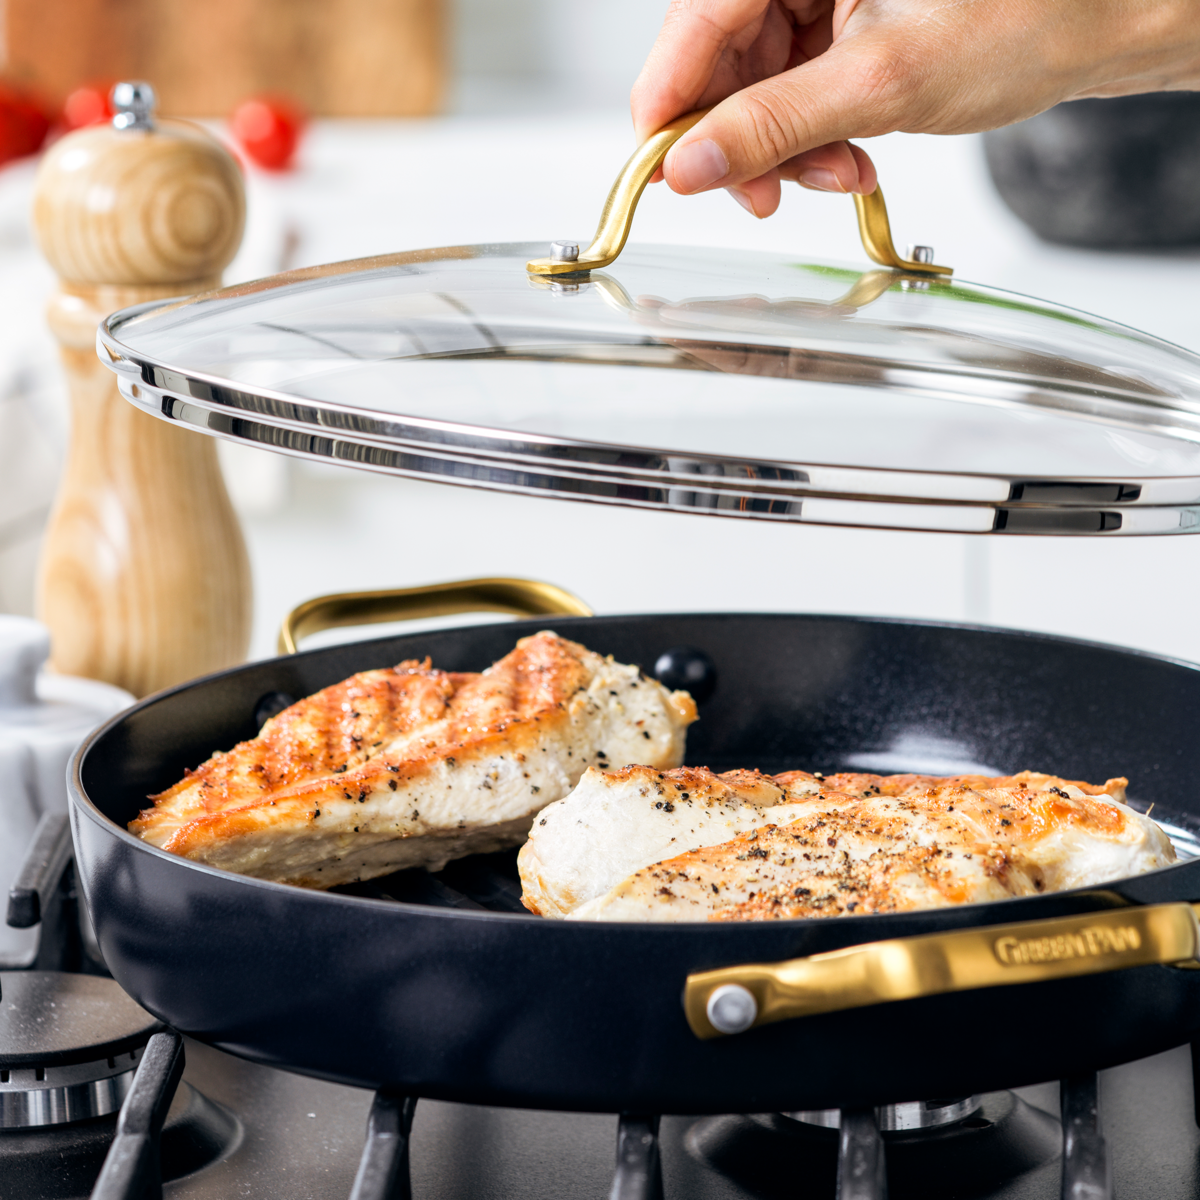 Reserve Ceramic Nonstick 11 Grill Pan with Lid